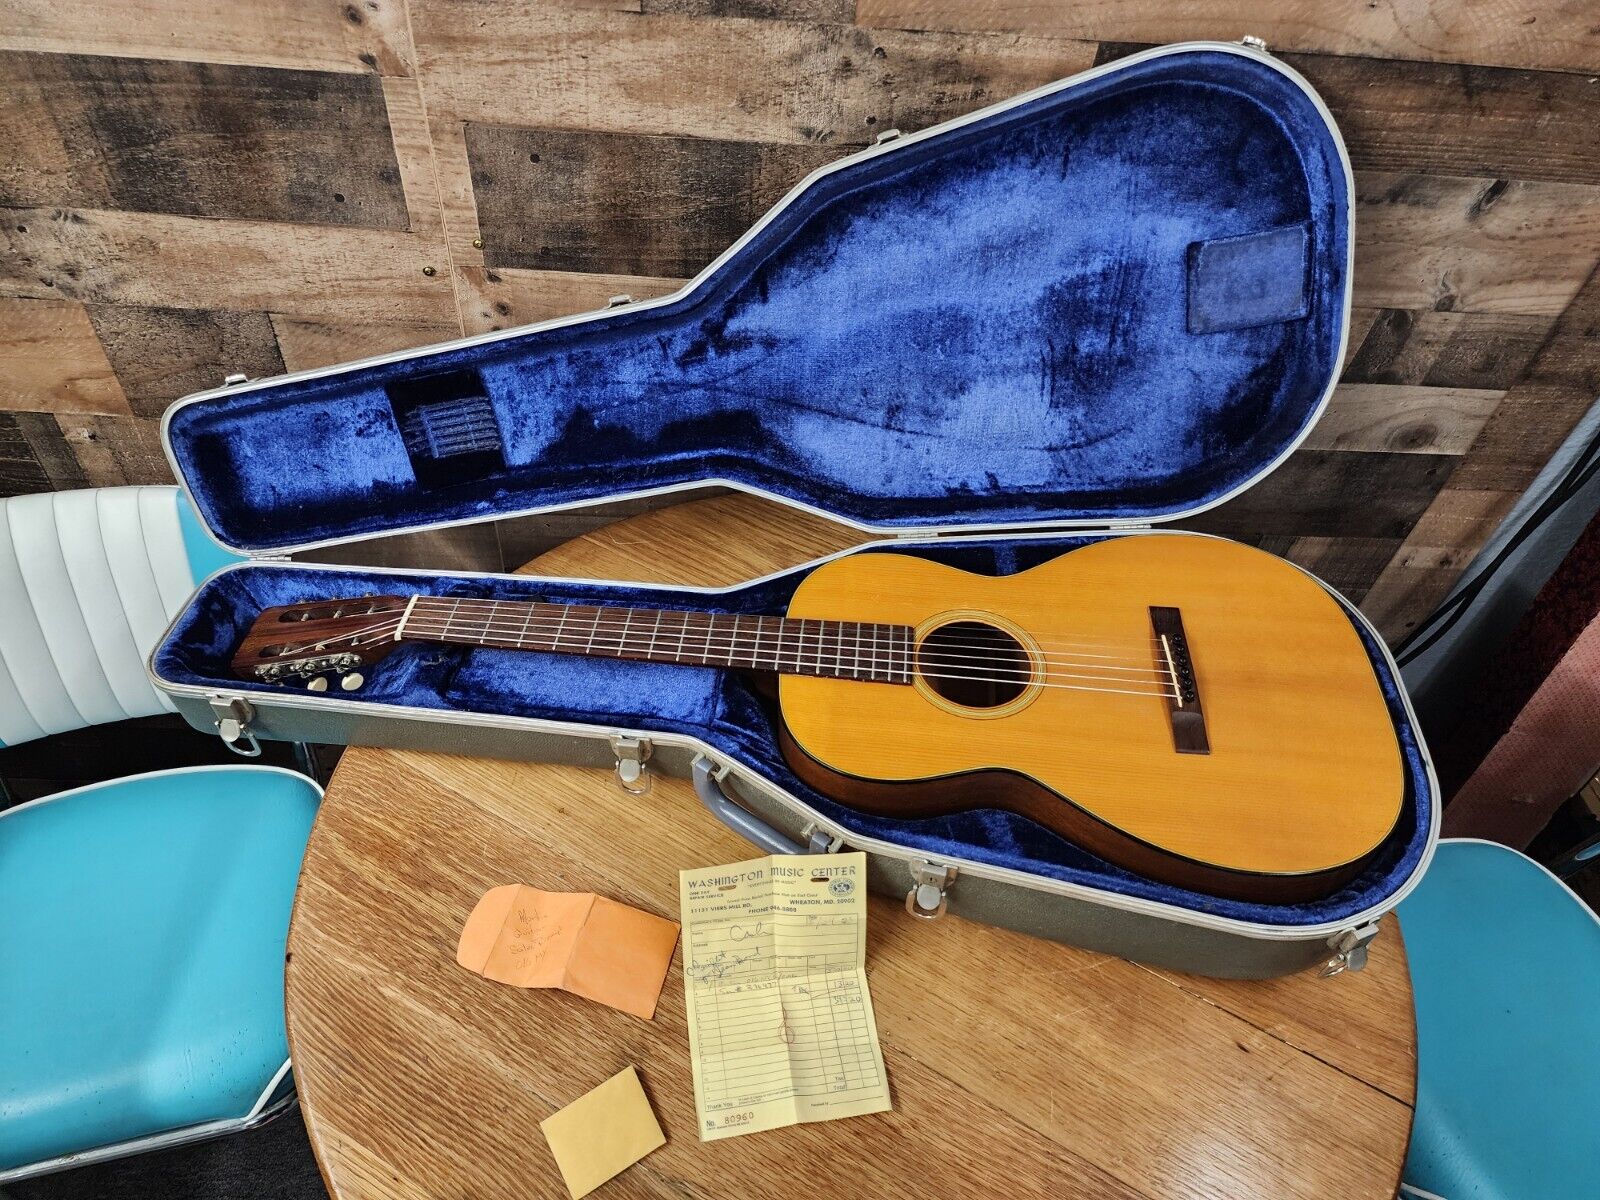 1972 Martin guitar  0-16NY Minty With Ohsc And Original Sales Receipt